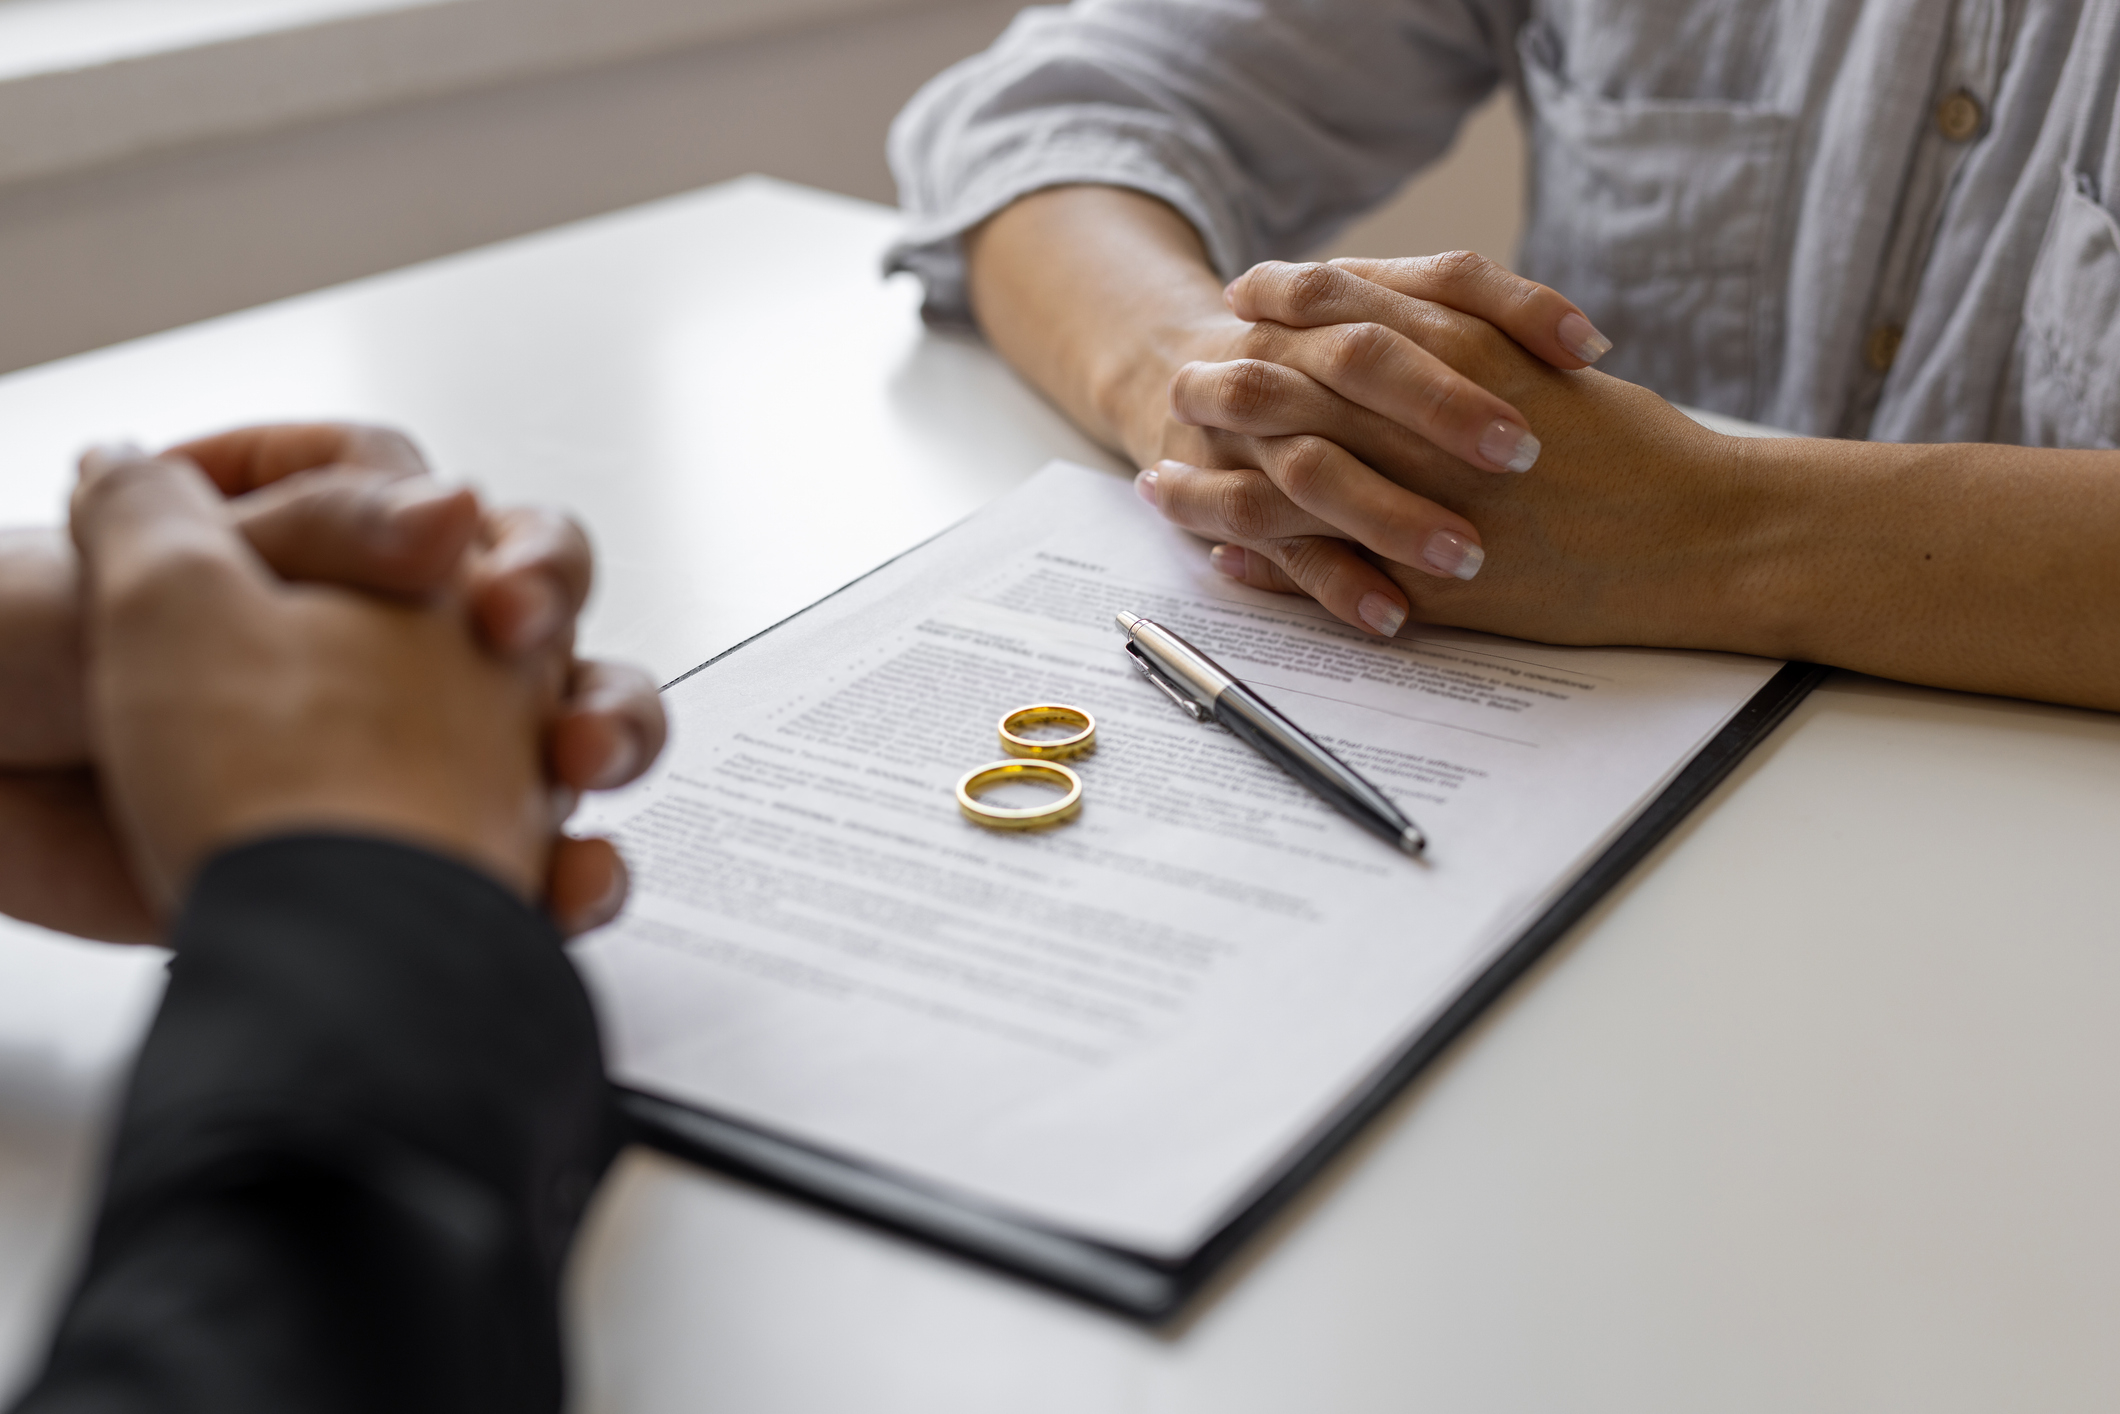 Two people&#x27;s hands on table with wedding rings and document, suggestive of marriage or partnership